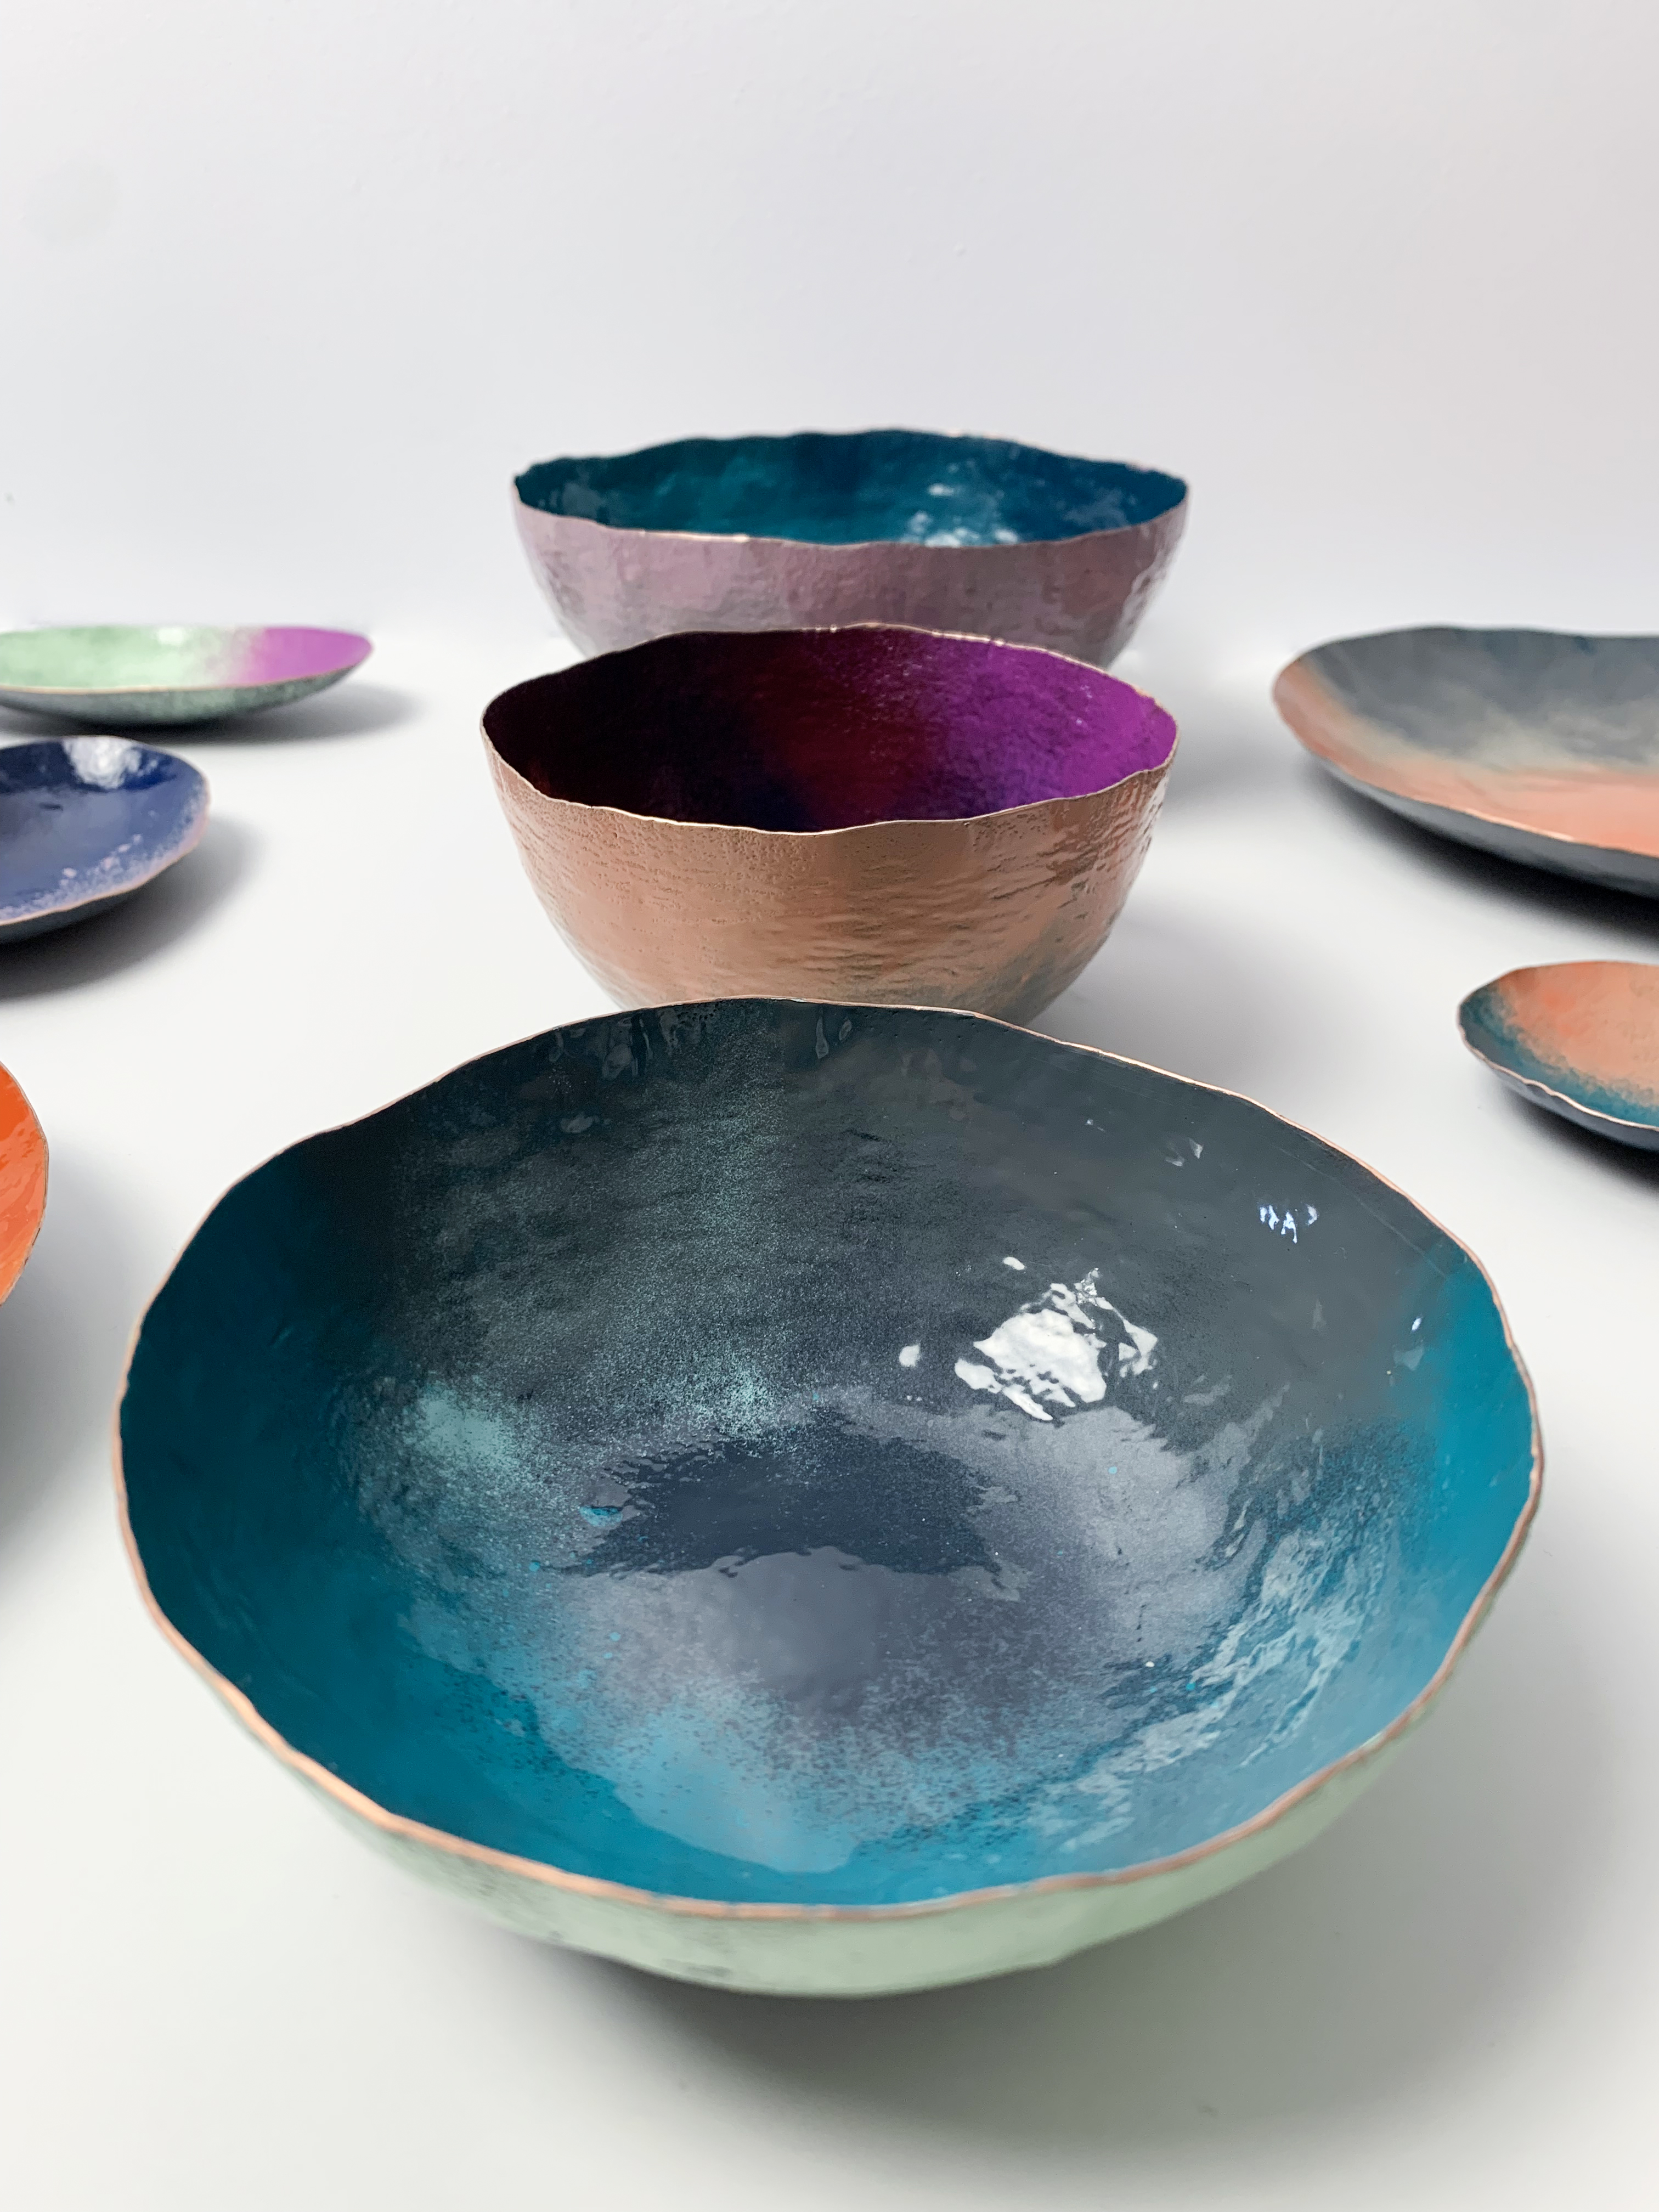 colorful decorative metalwork - copper and powdercoated bowls by metalsmith megan auman